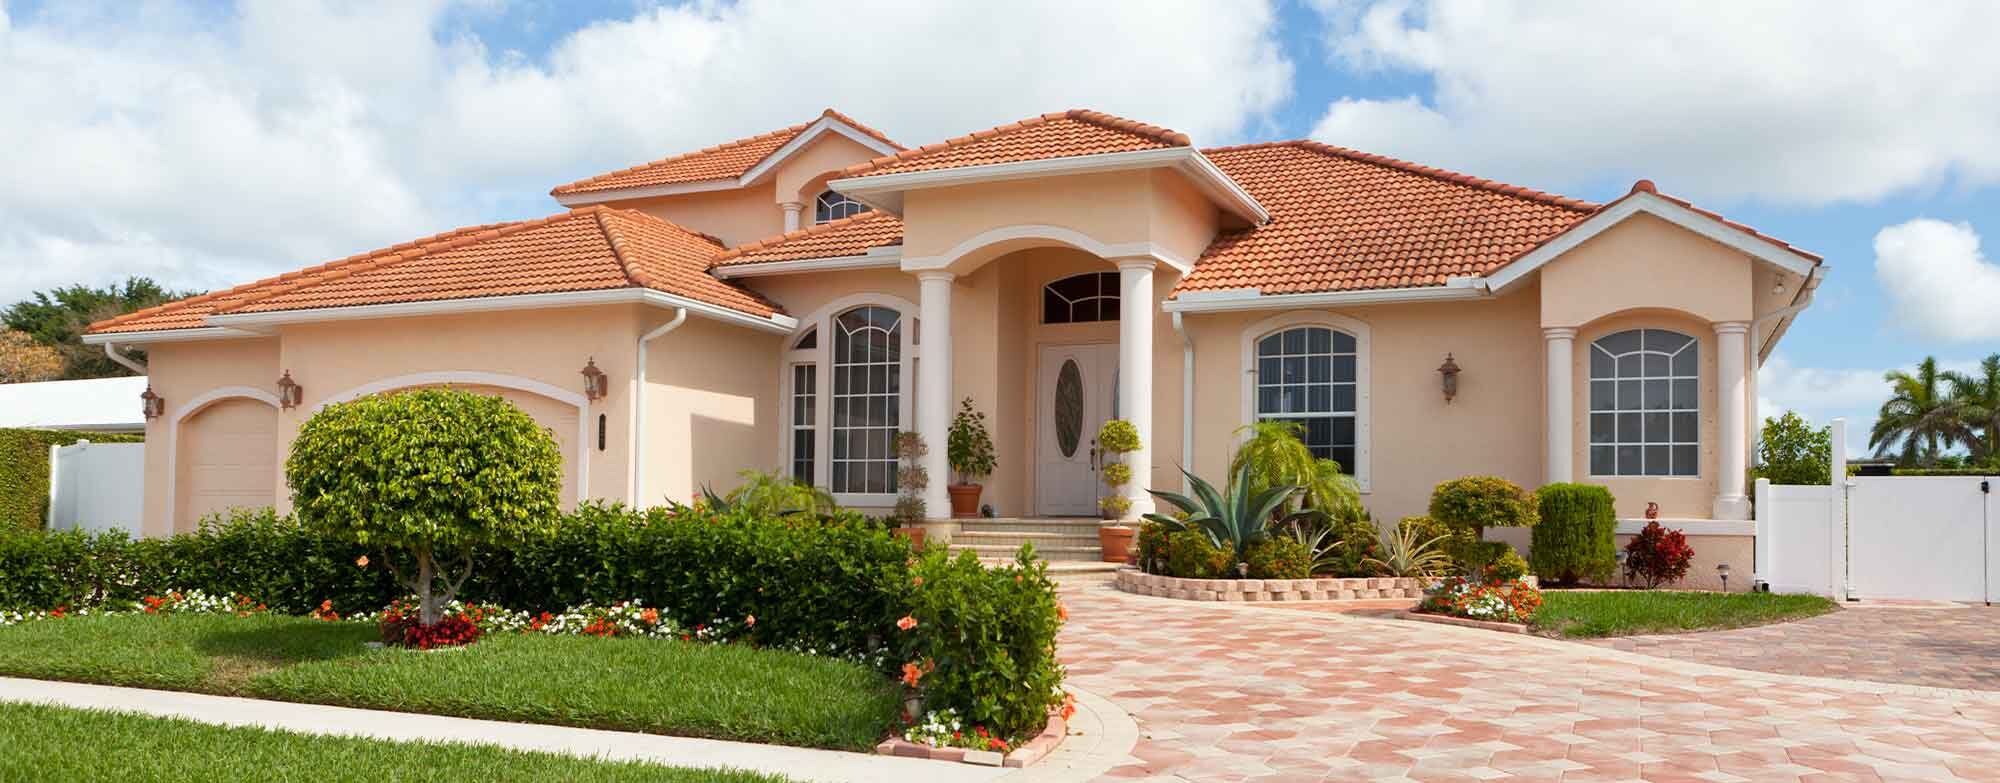 A Florida home looks beautiful by having operable septic systems distributing wastewater back into the ground.